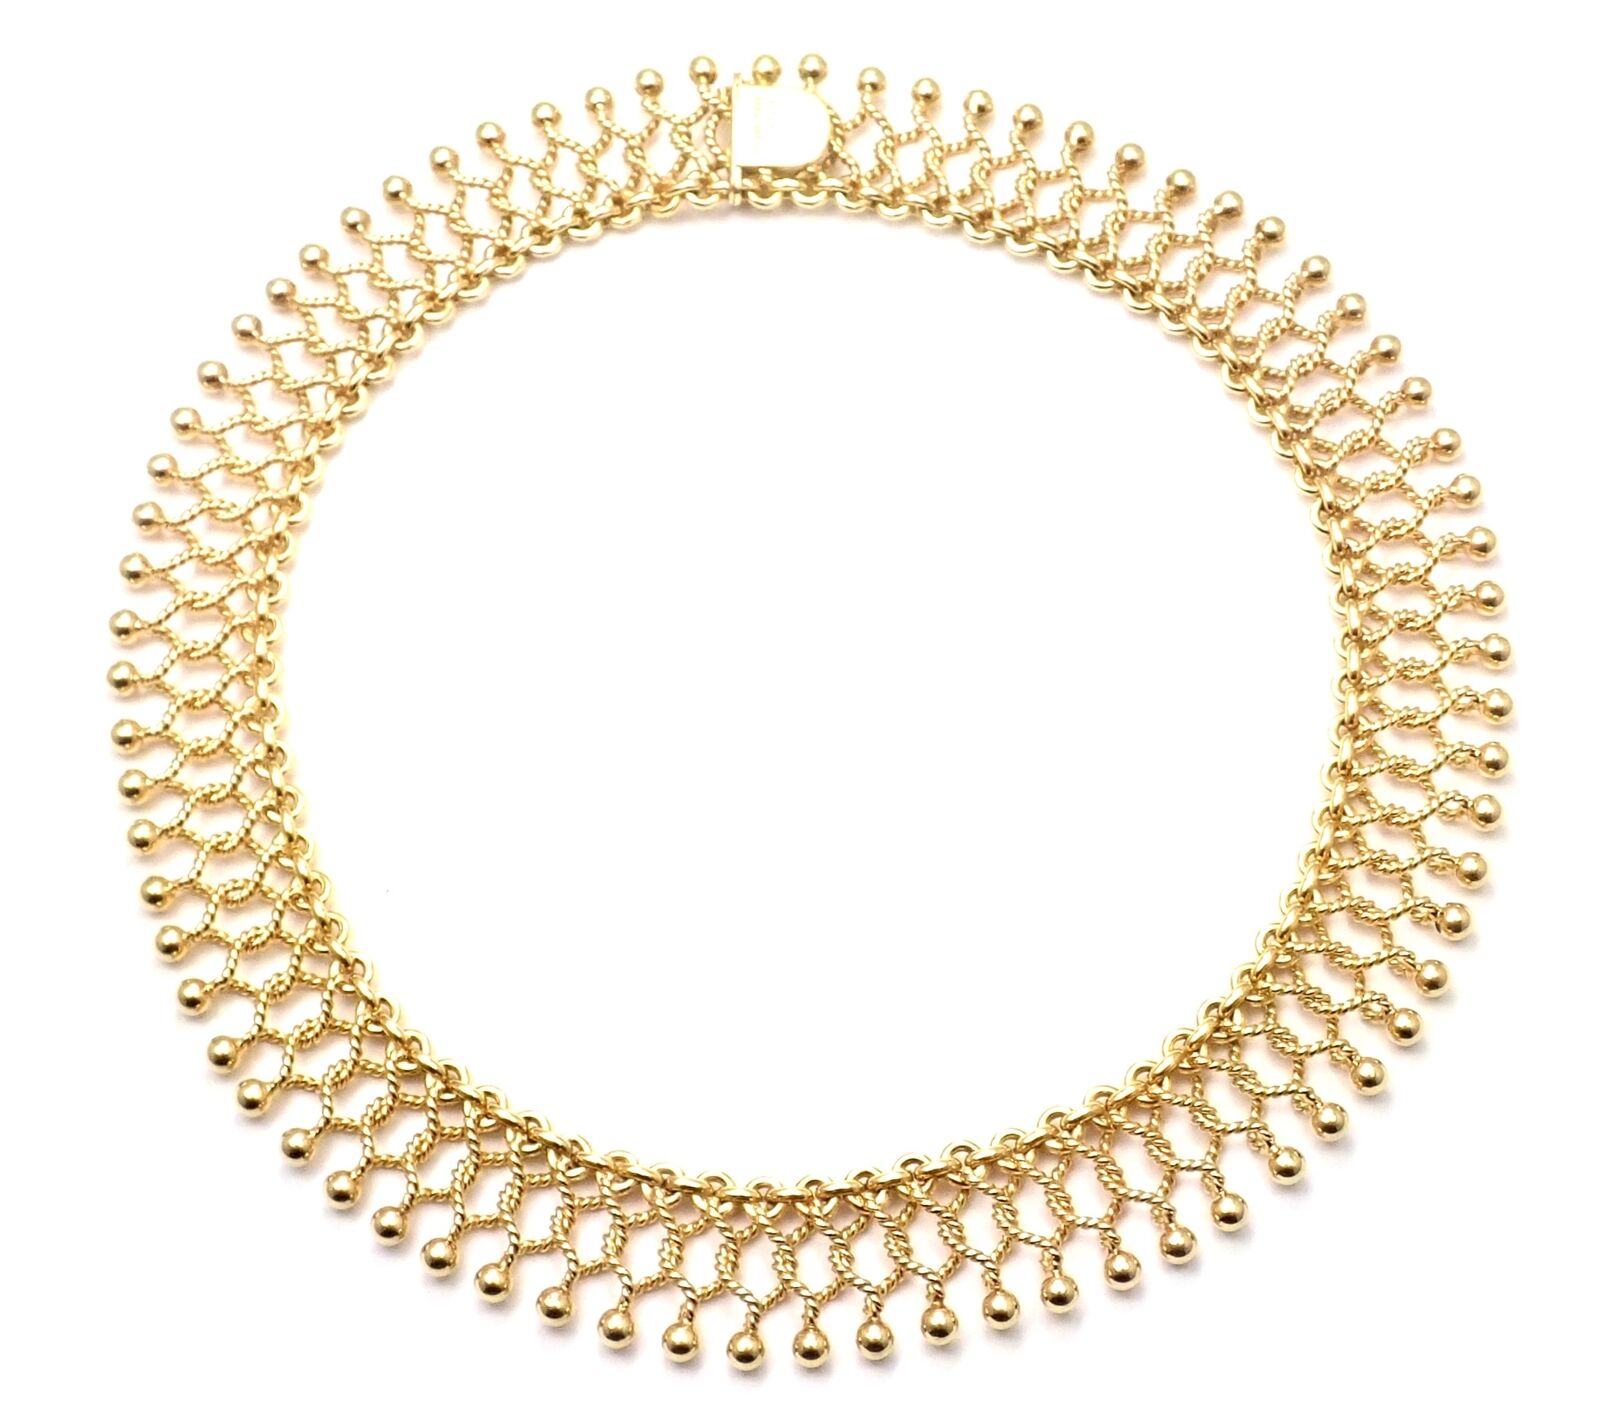 Sold at Auction: 14K Gold Cleopatra Egyptian Choker Necklace 34.4g.